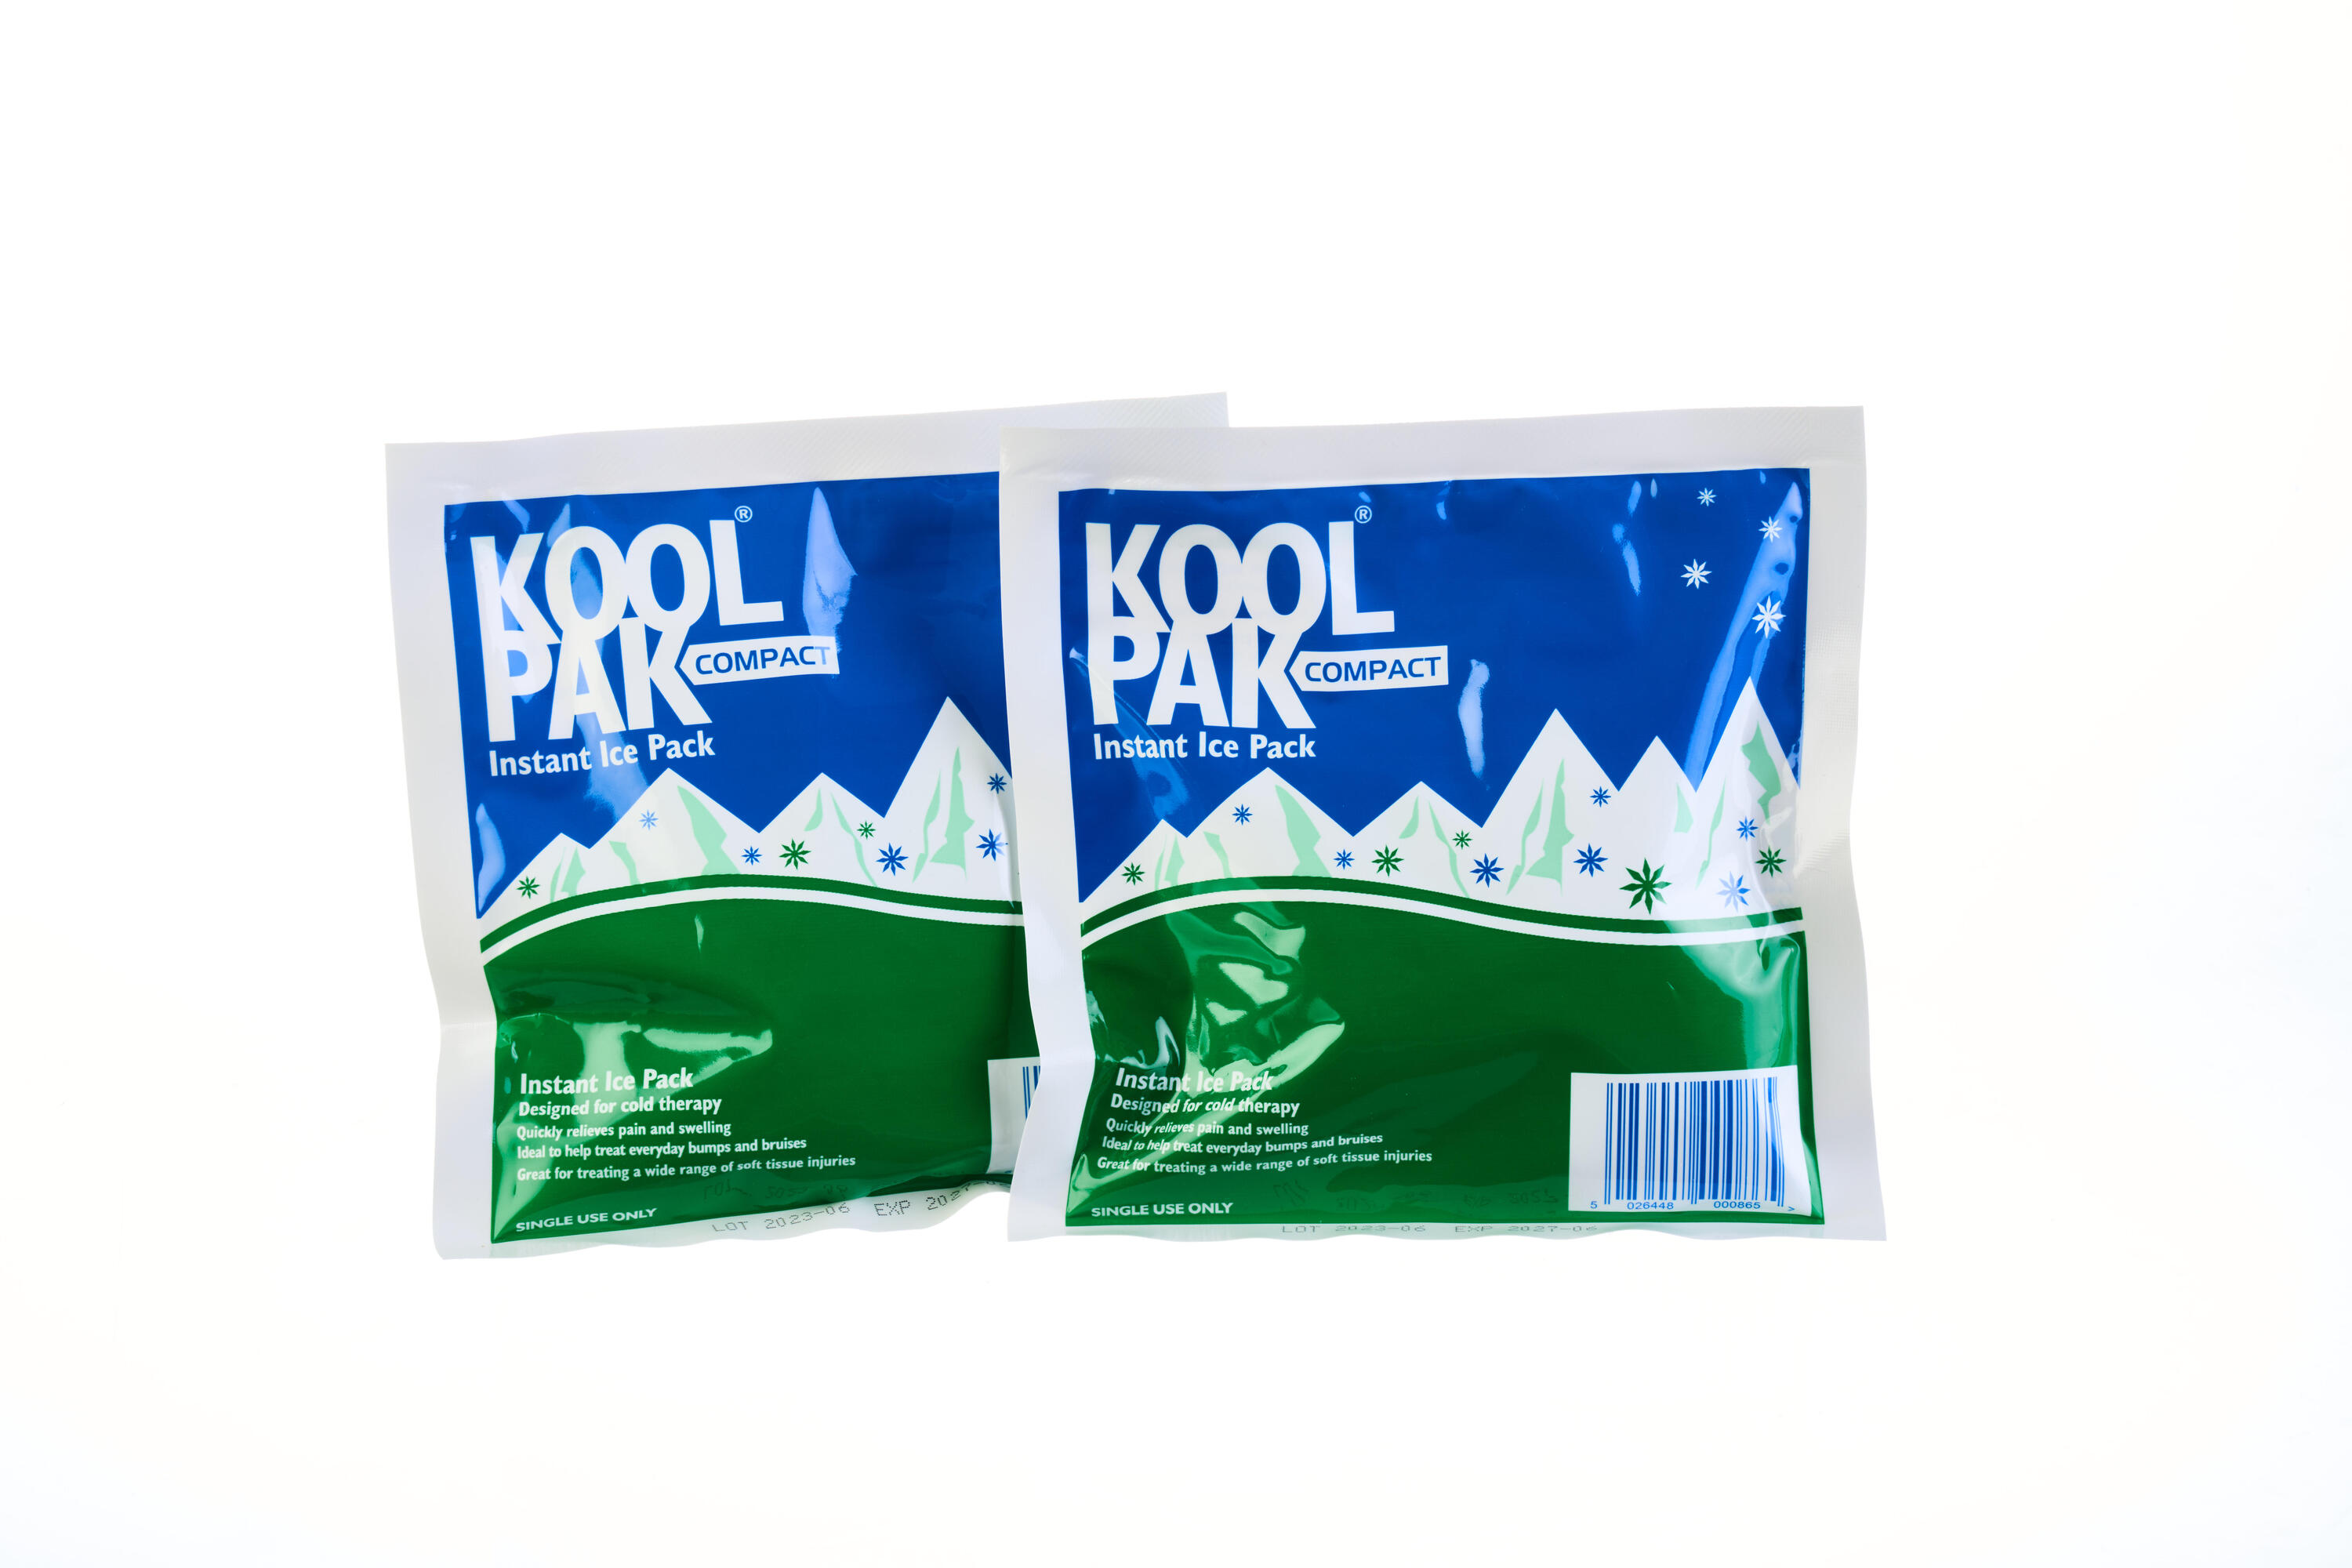 Koolpak Compact Instant Ice Pack - 15 x 15cm - Pack of 20 4/5